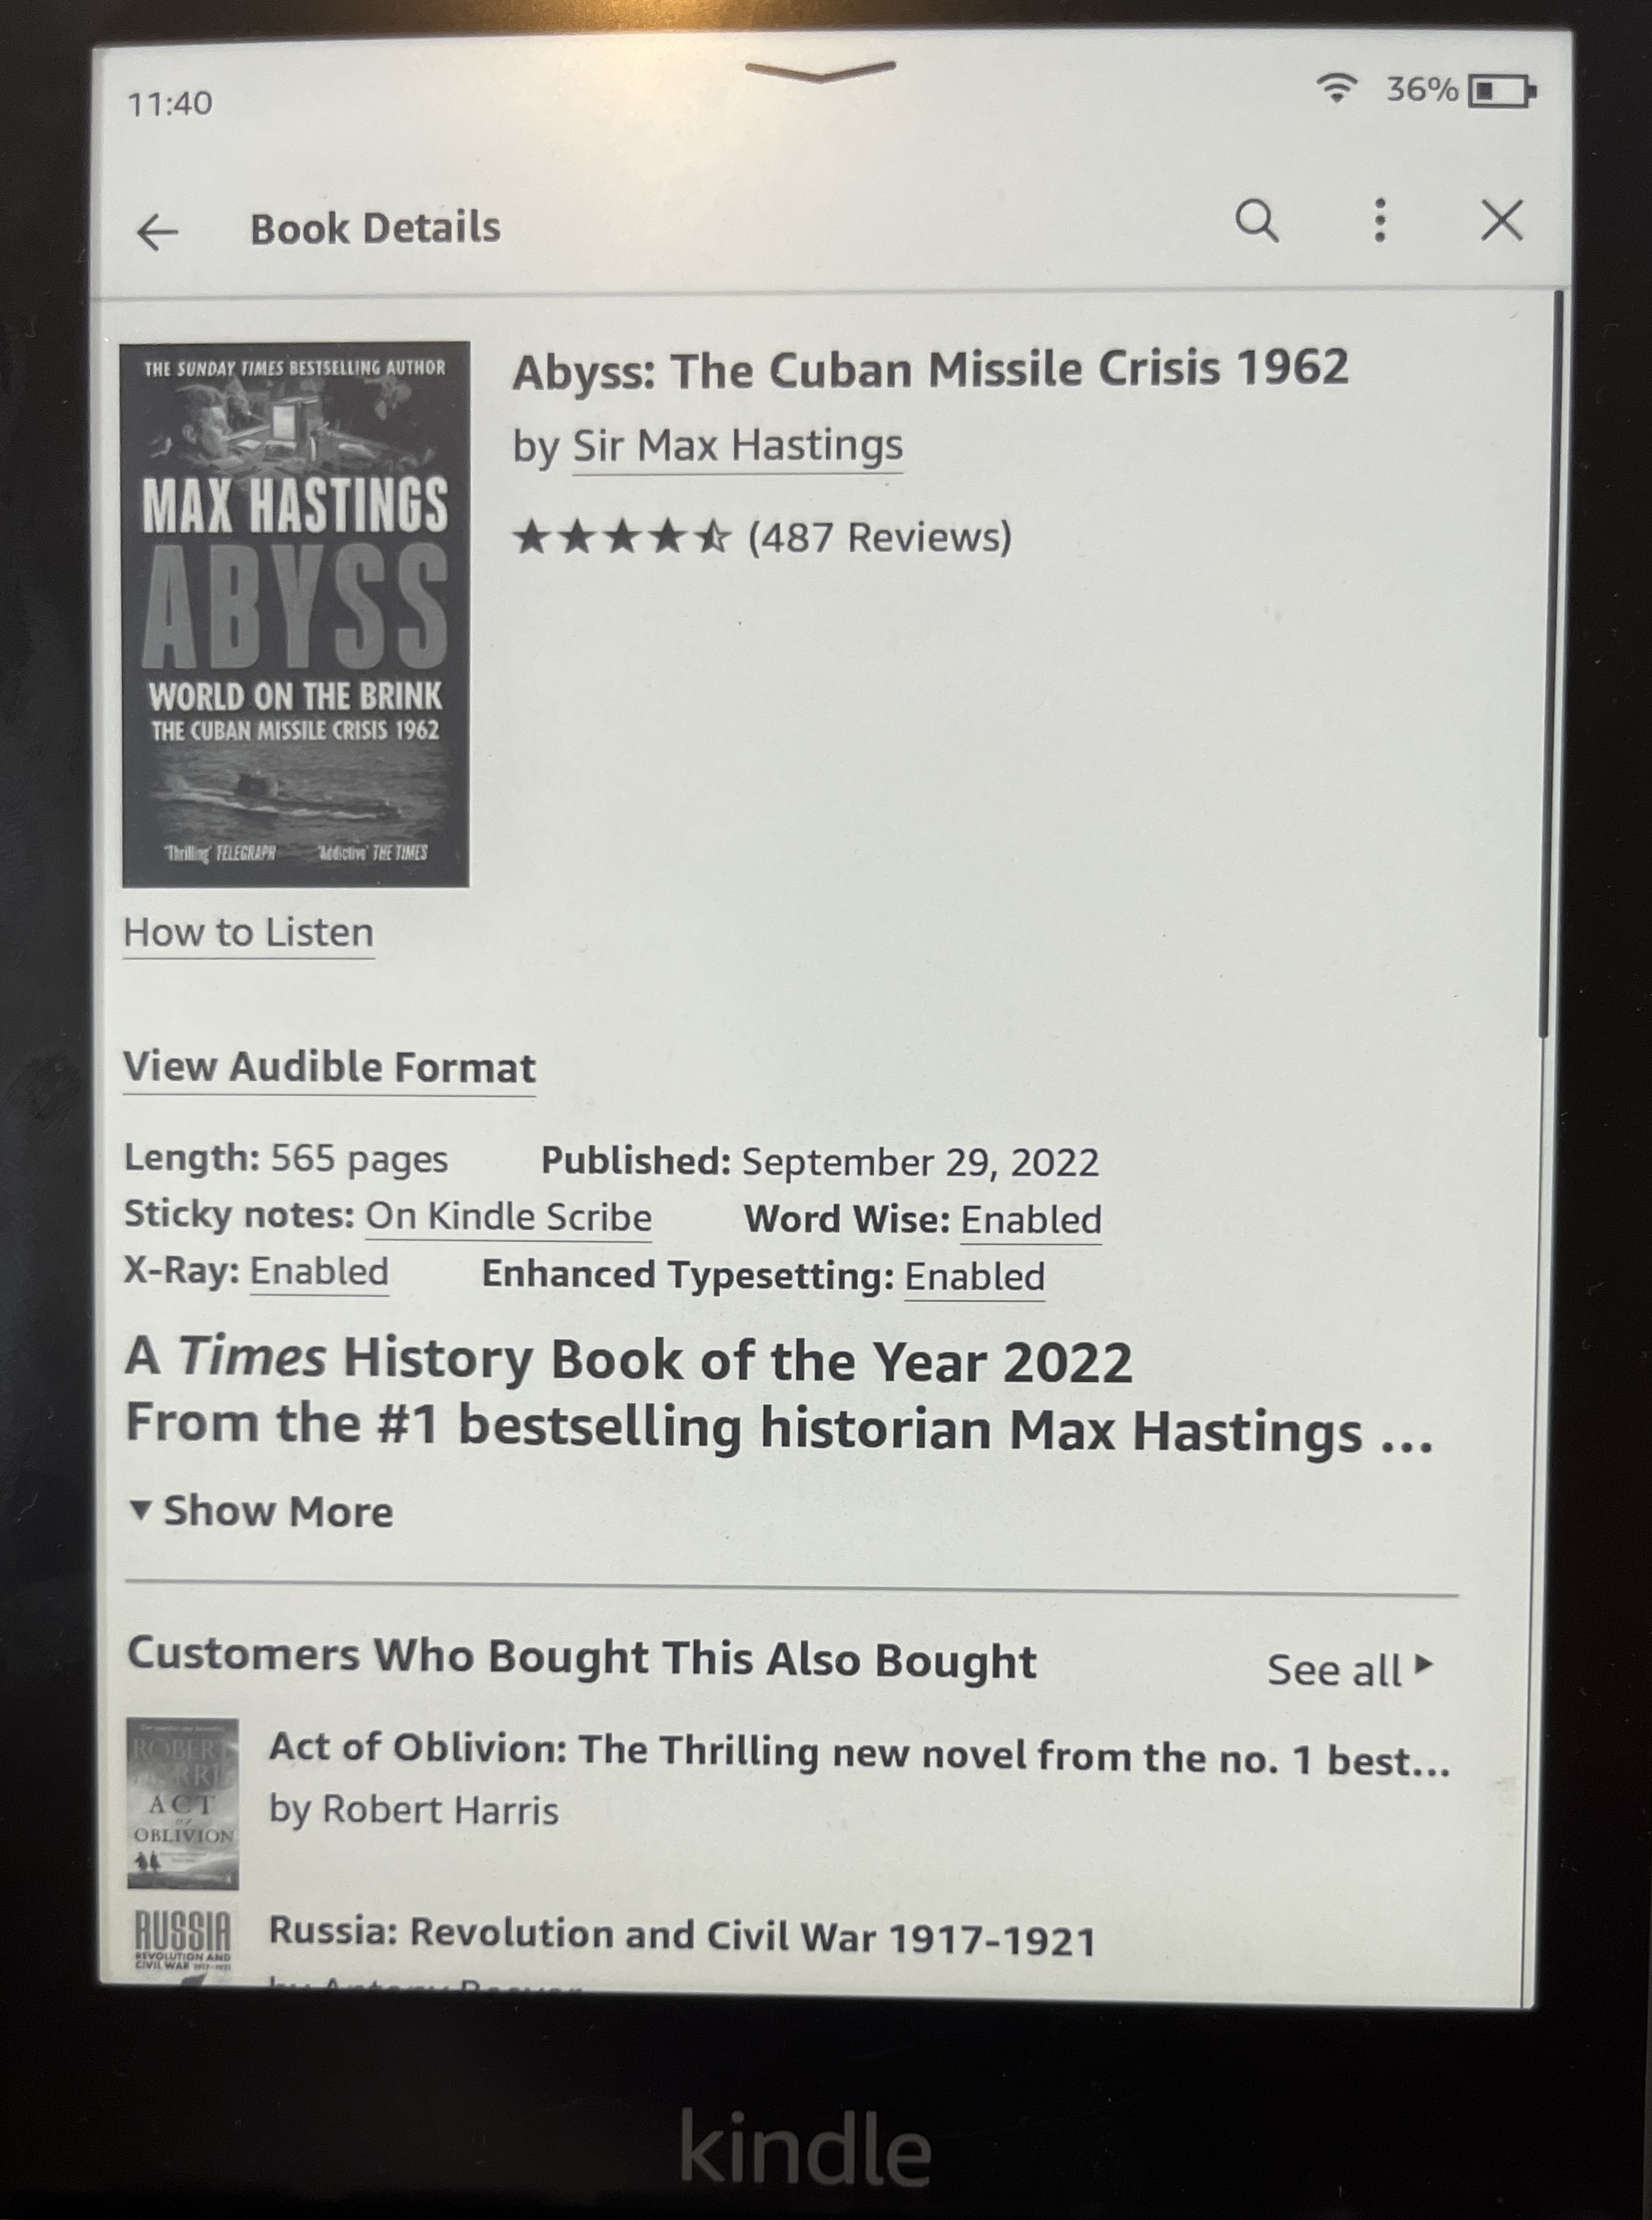 Review: Should you buy the Kindle Paperwhite?